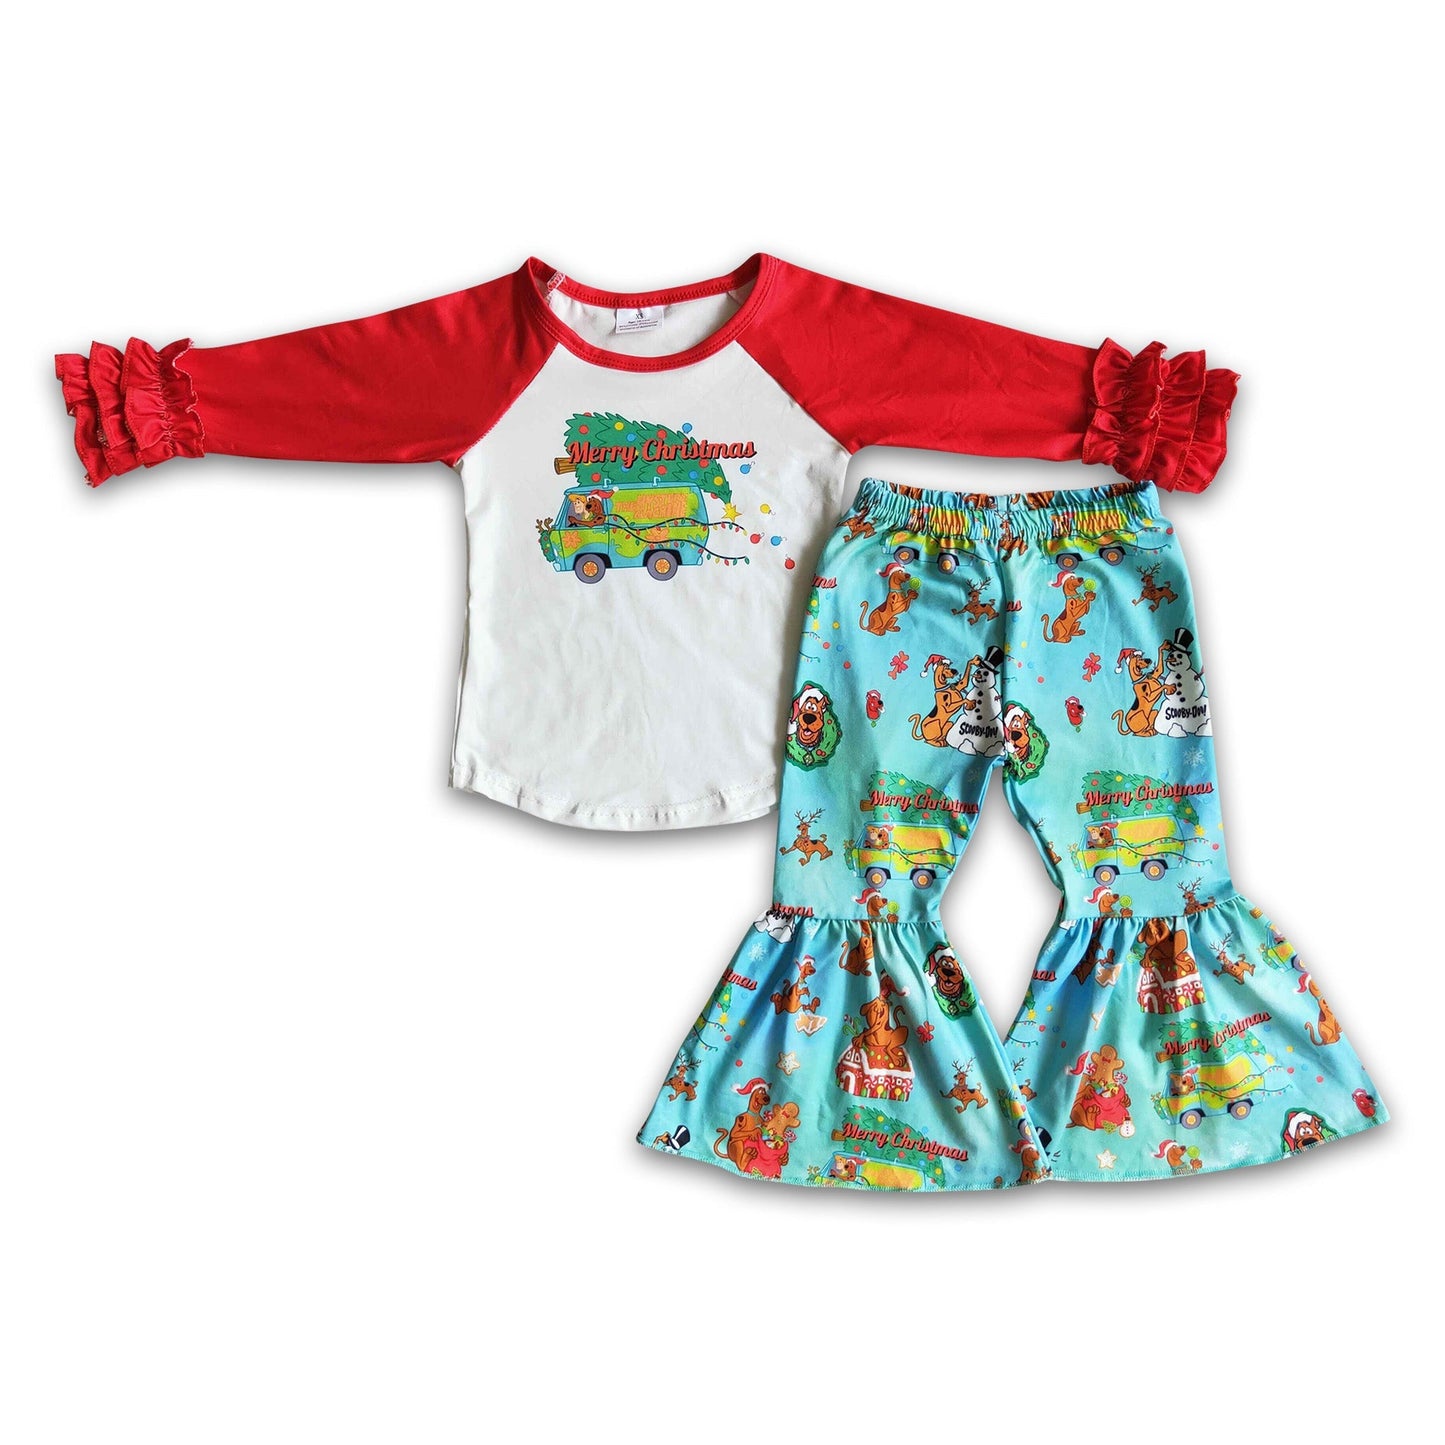 The mystery machine merry Christmas outfits